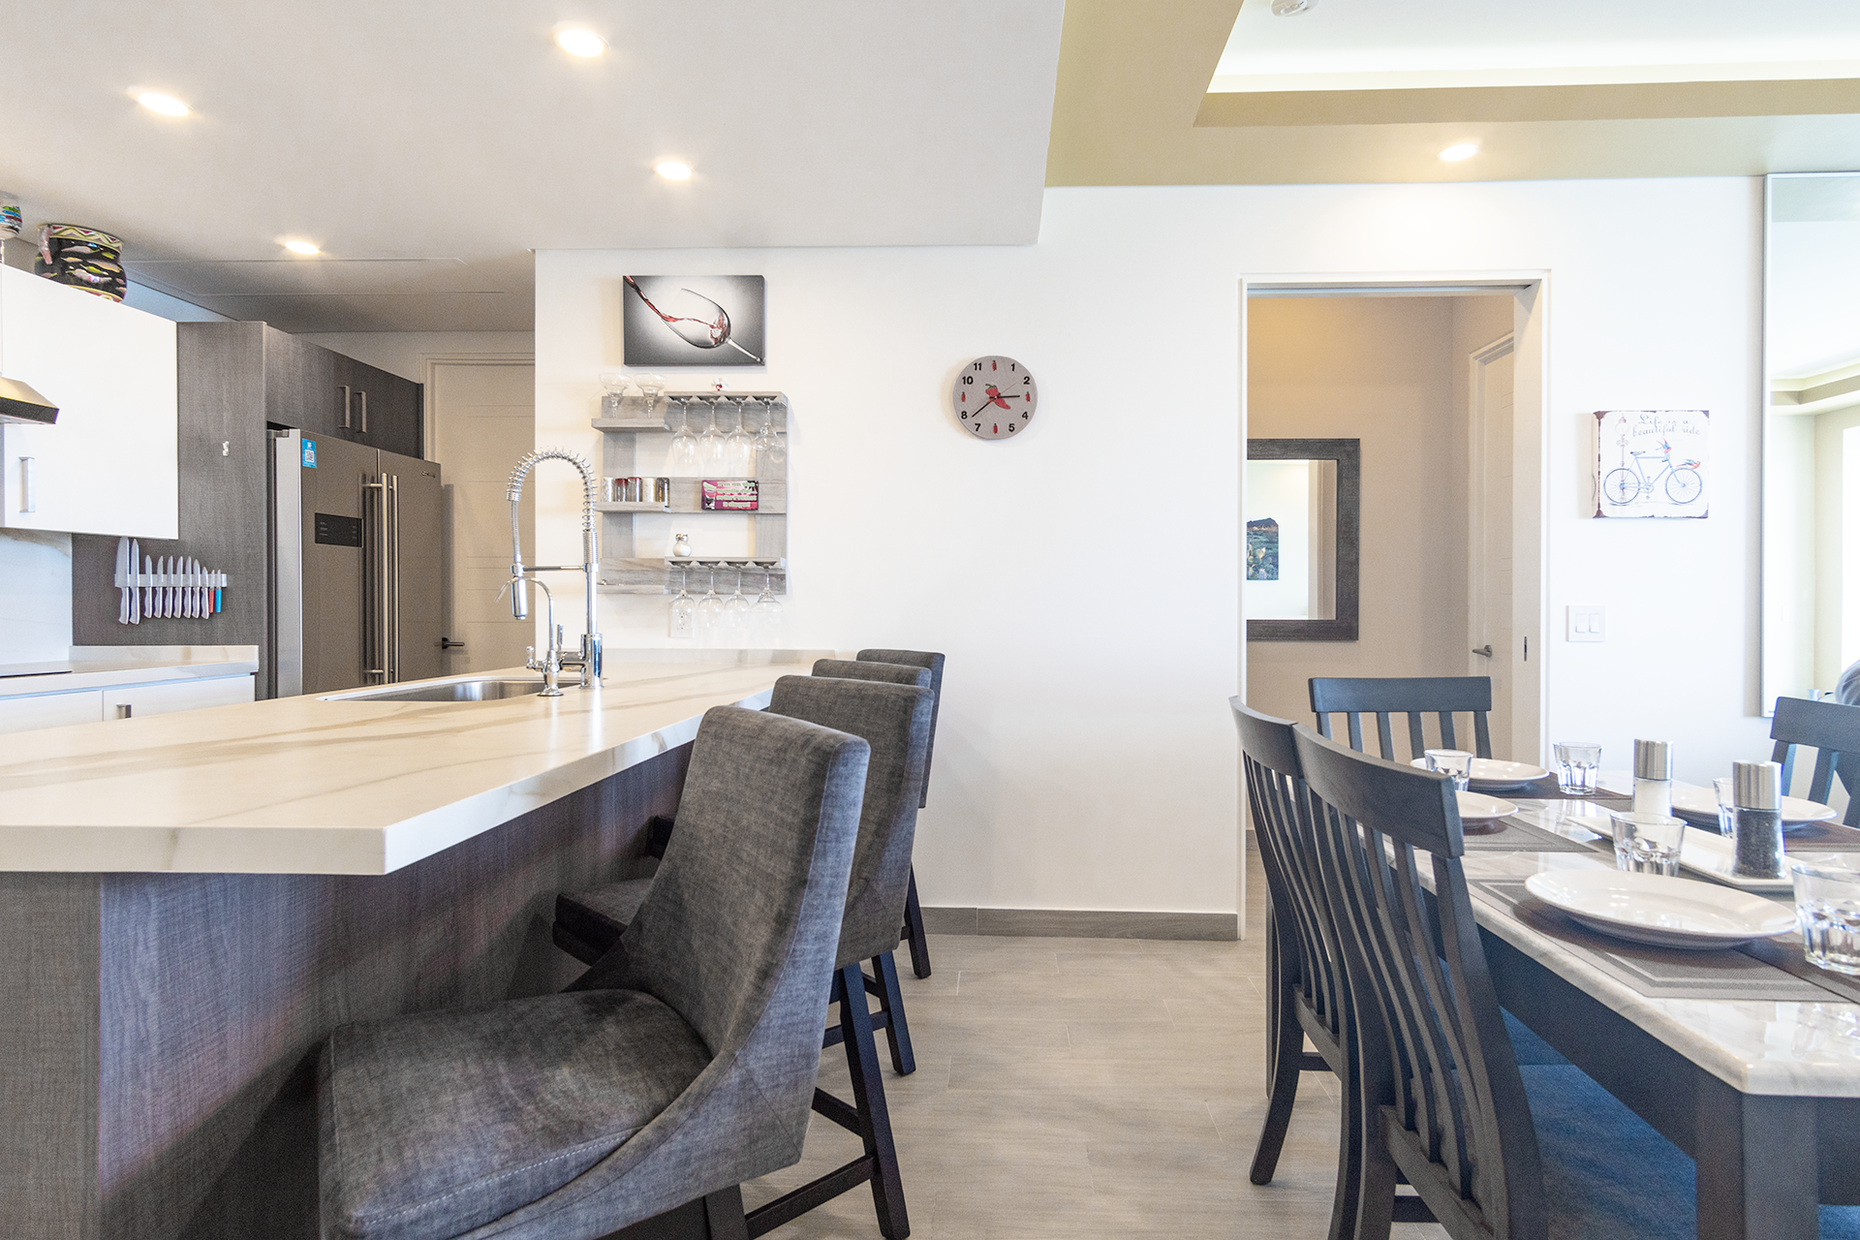 kitchen and dining table with bar stools